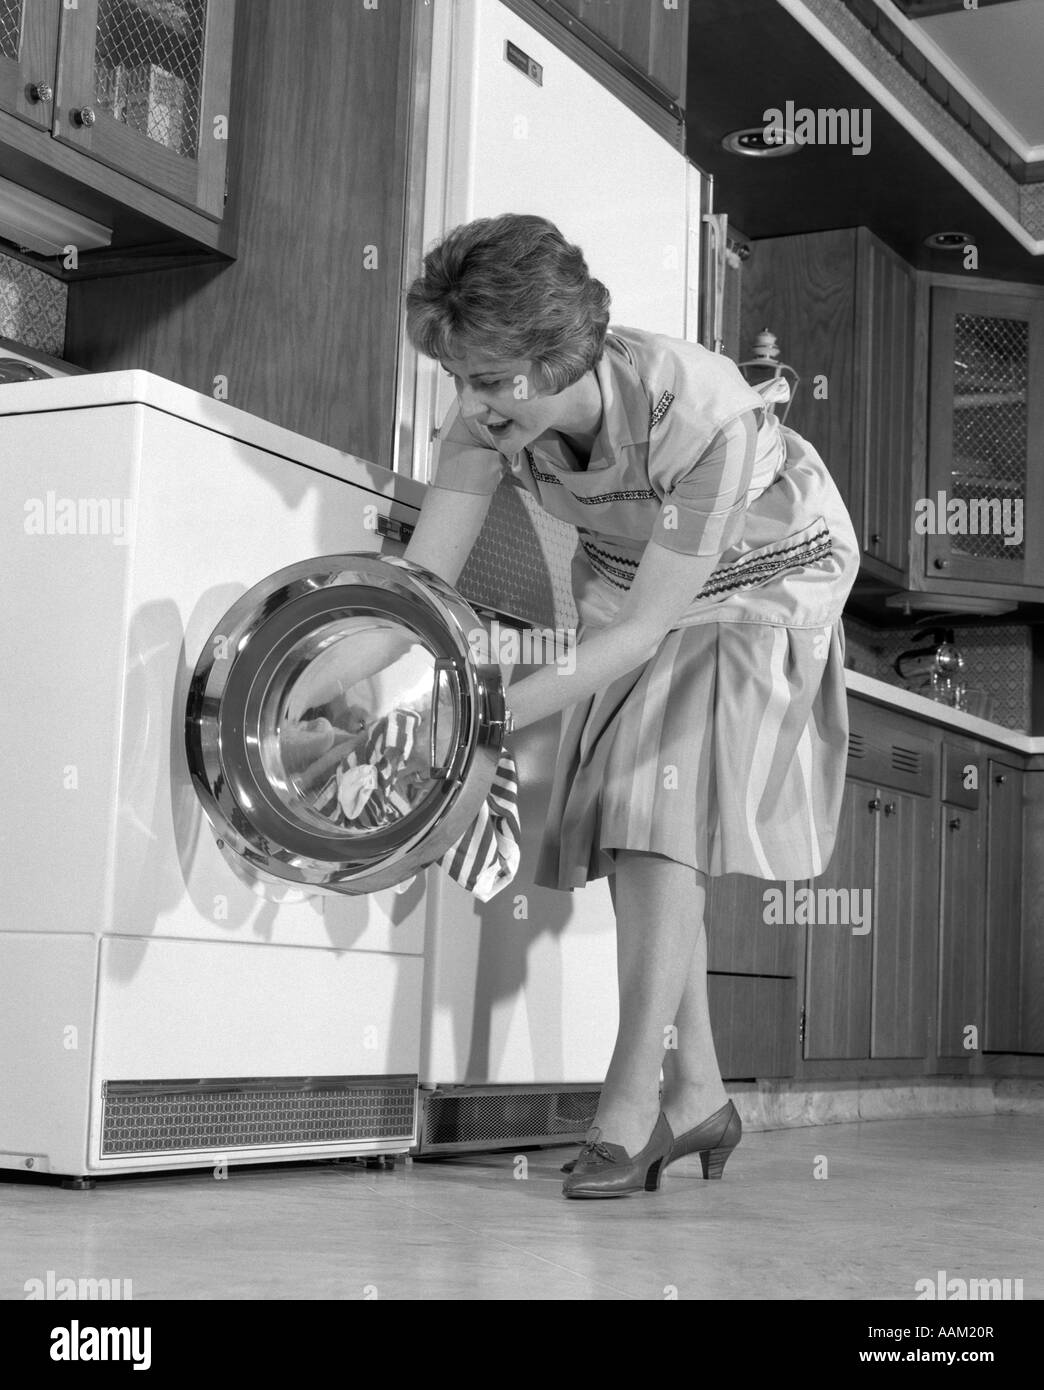 Doing Laundry By Hand When There's No Electricity  Vintage laundry,  Vintage housewife, Doing laundry